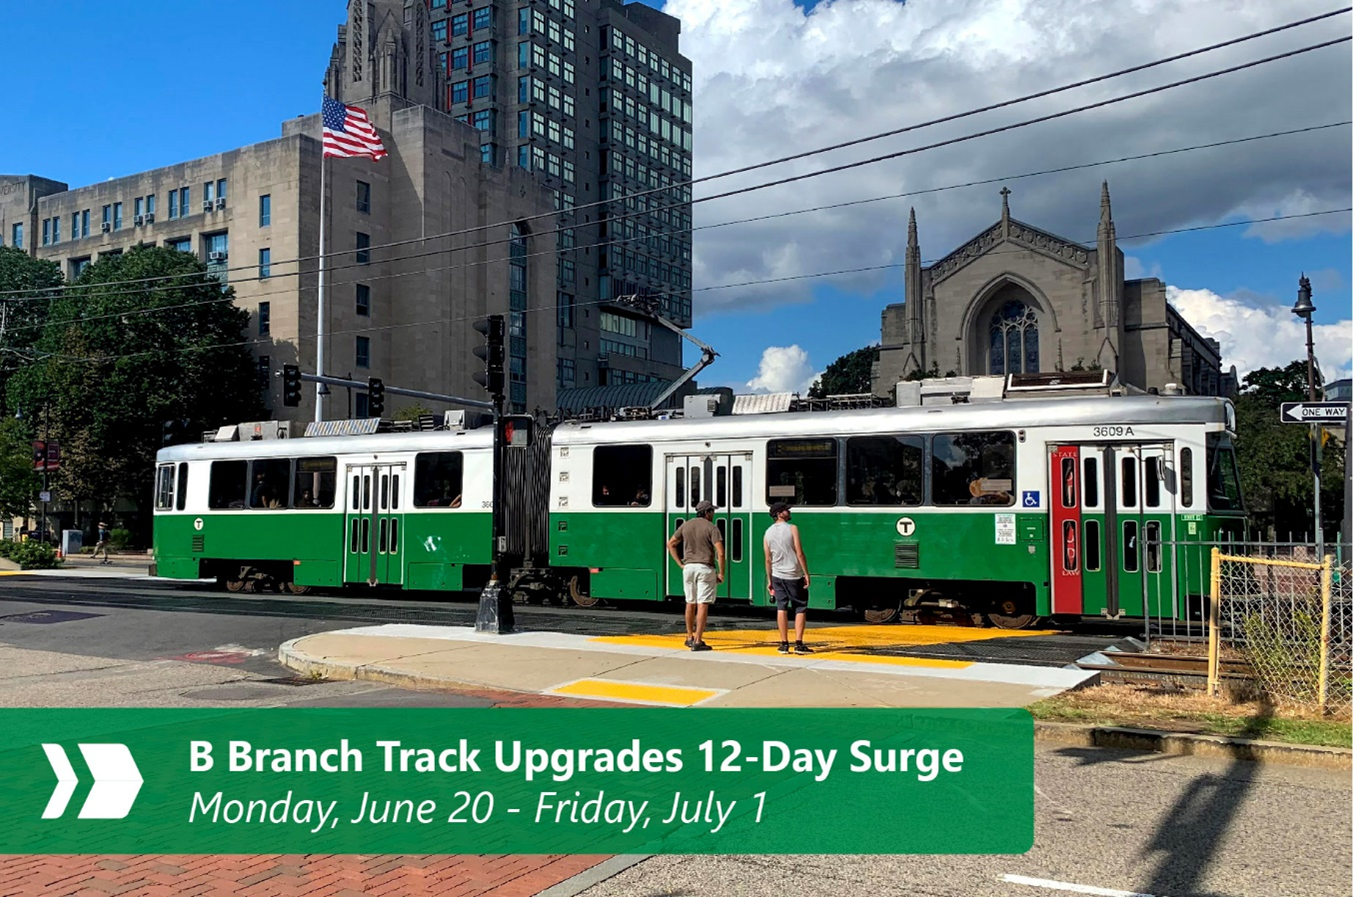 The 12-day full access closure on the entirety of the B branch will begin Monday, June 20, through Friday, July 1.